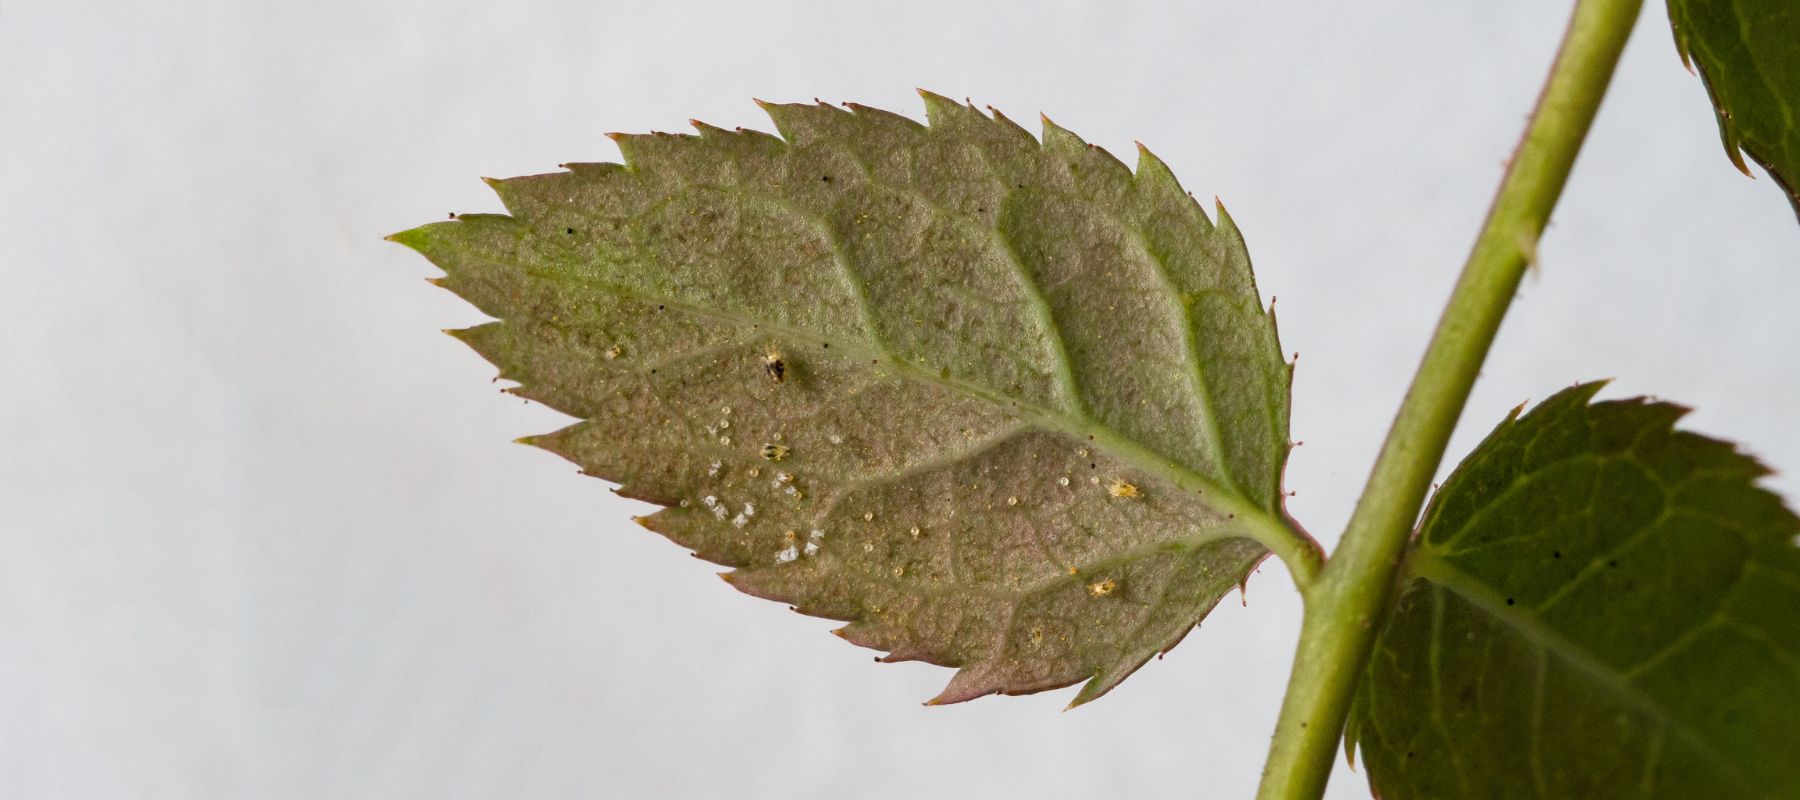 What are Spider mites?